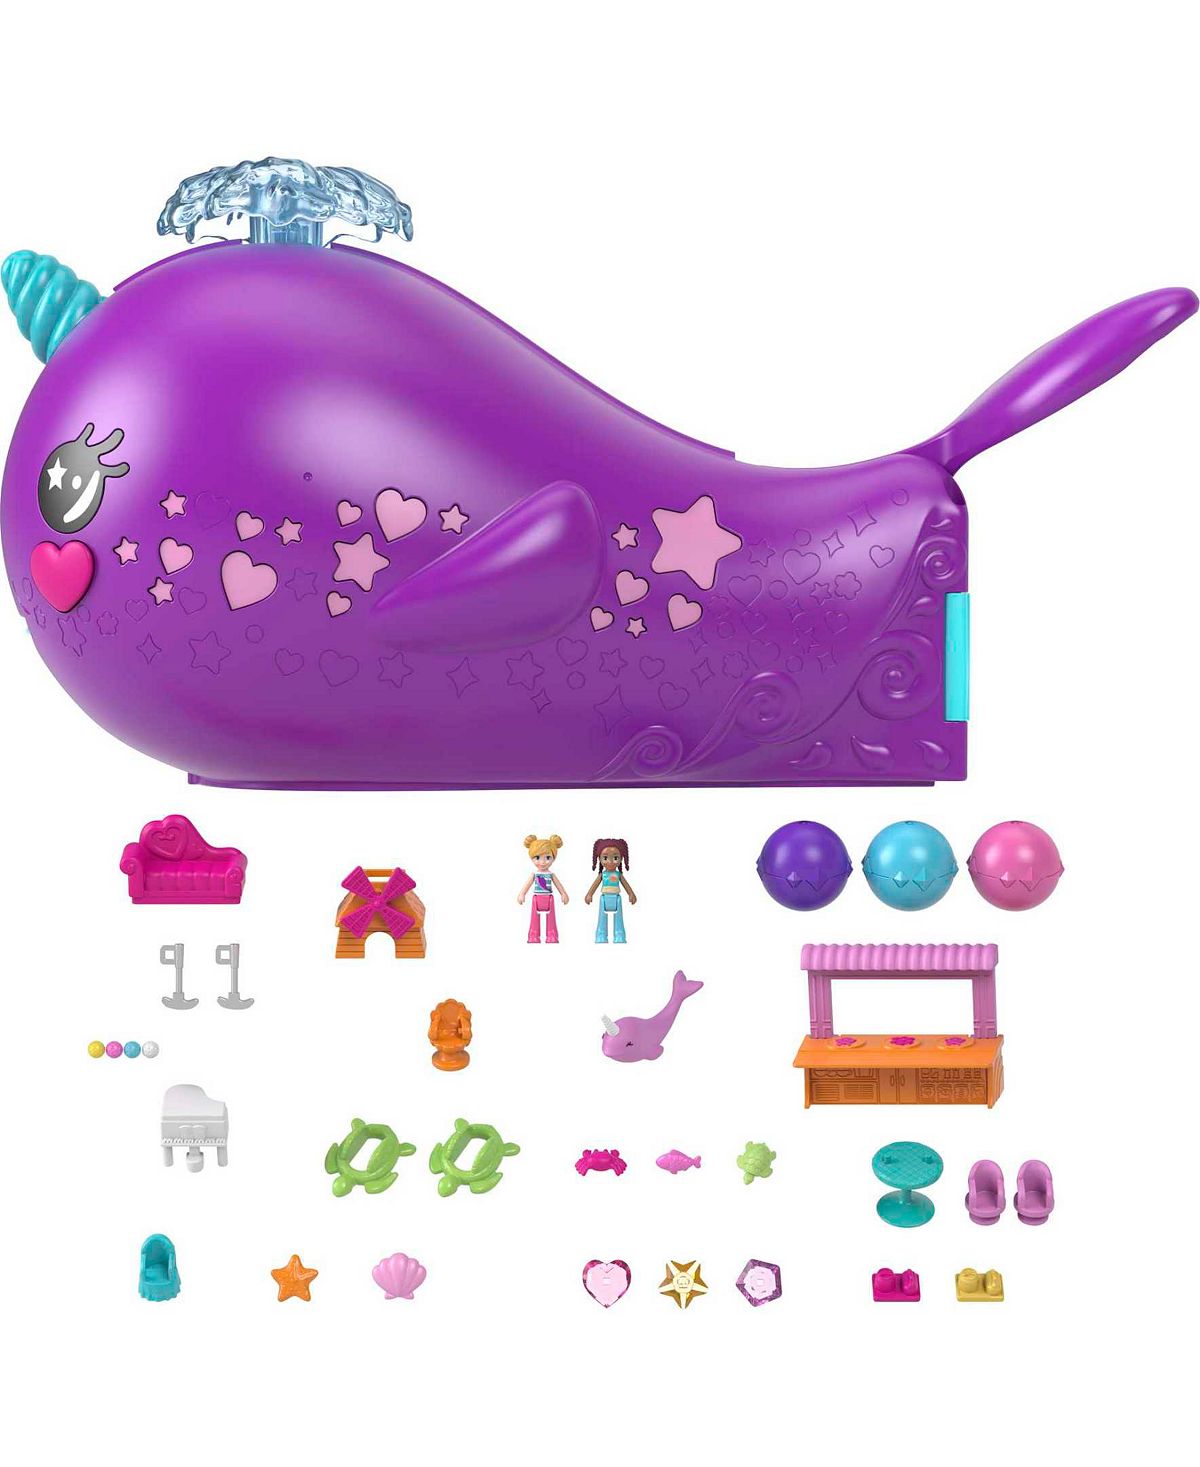 Polly Pocket Sparkle Cove Adventure Narwhal Adventurer Boat Playset